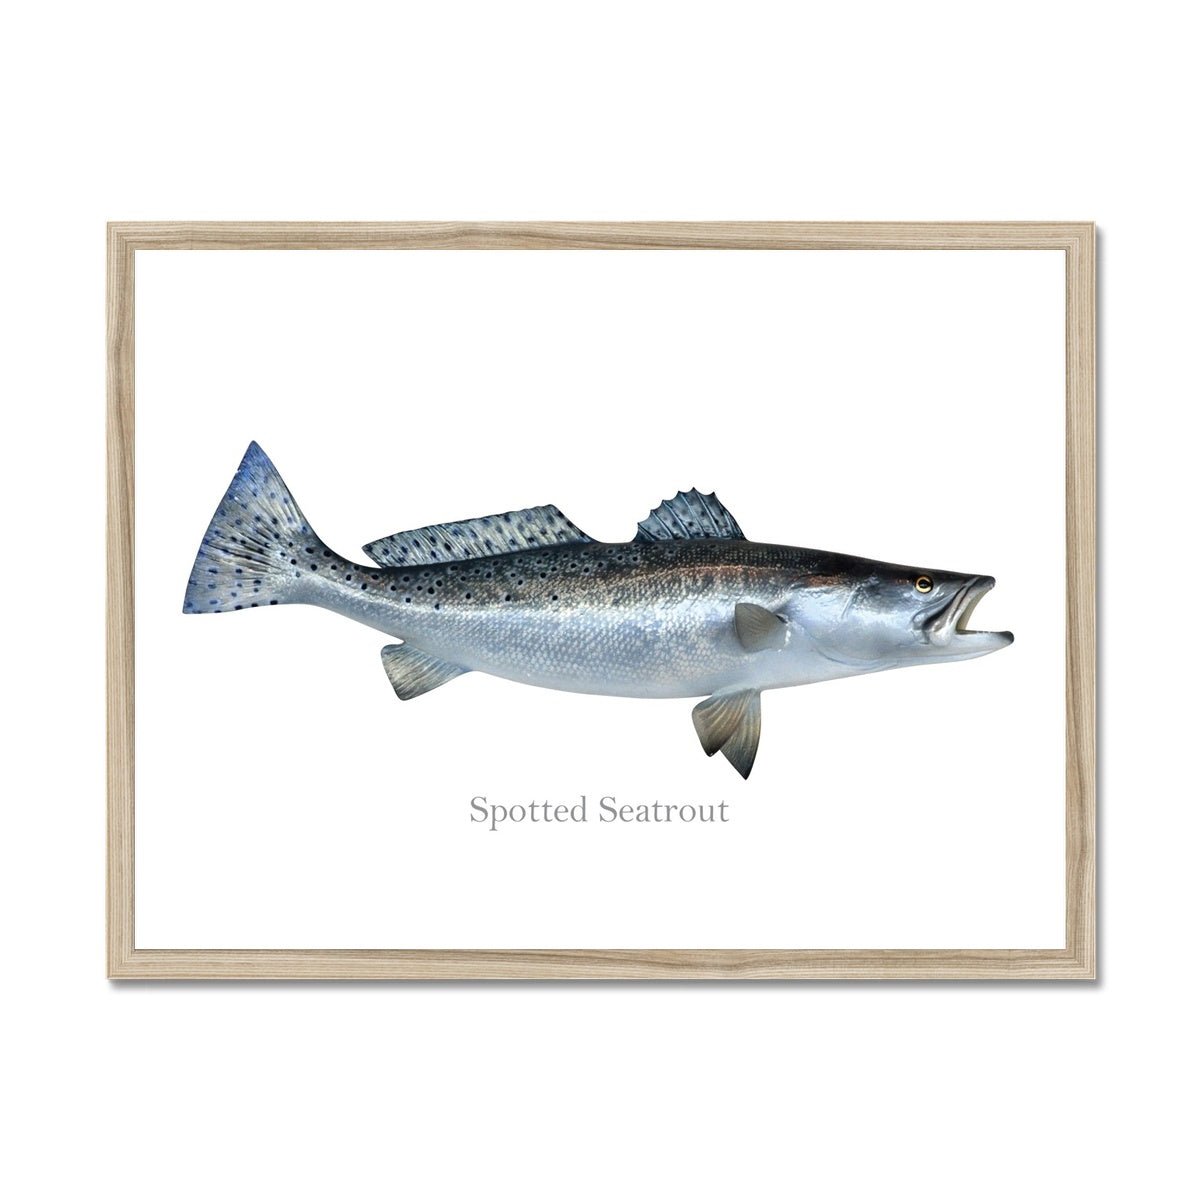 Spotted Seatrout - Framed Print - madfishlab.com